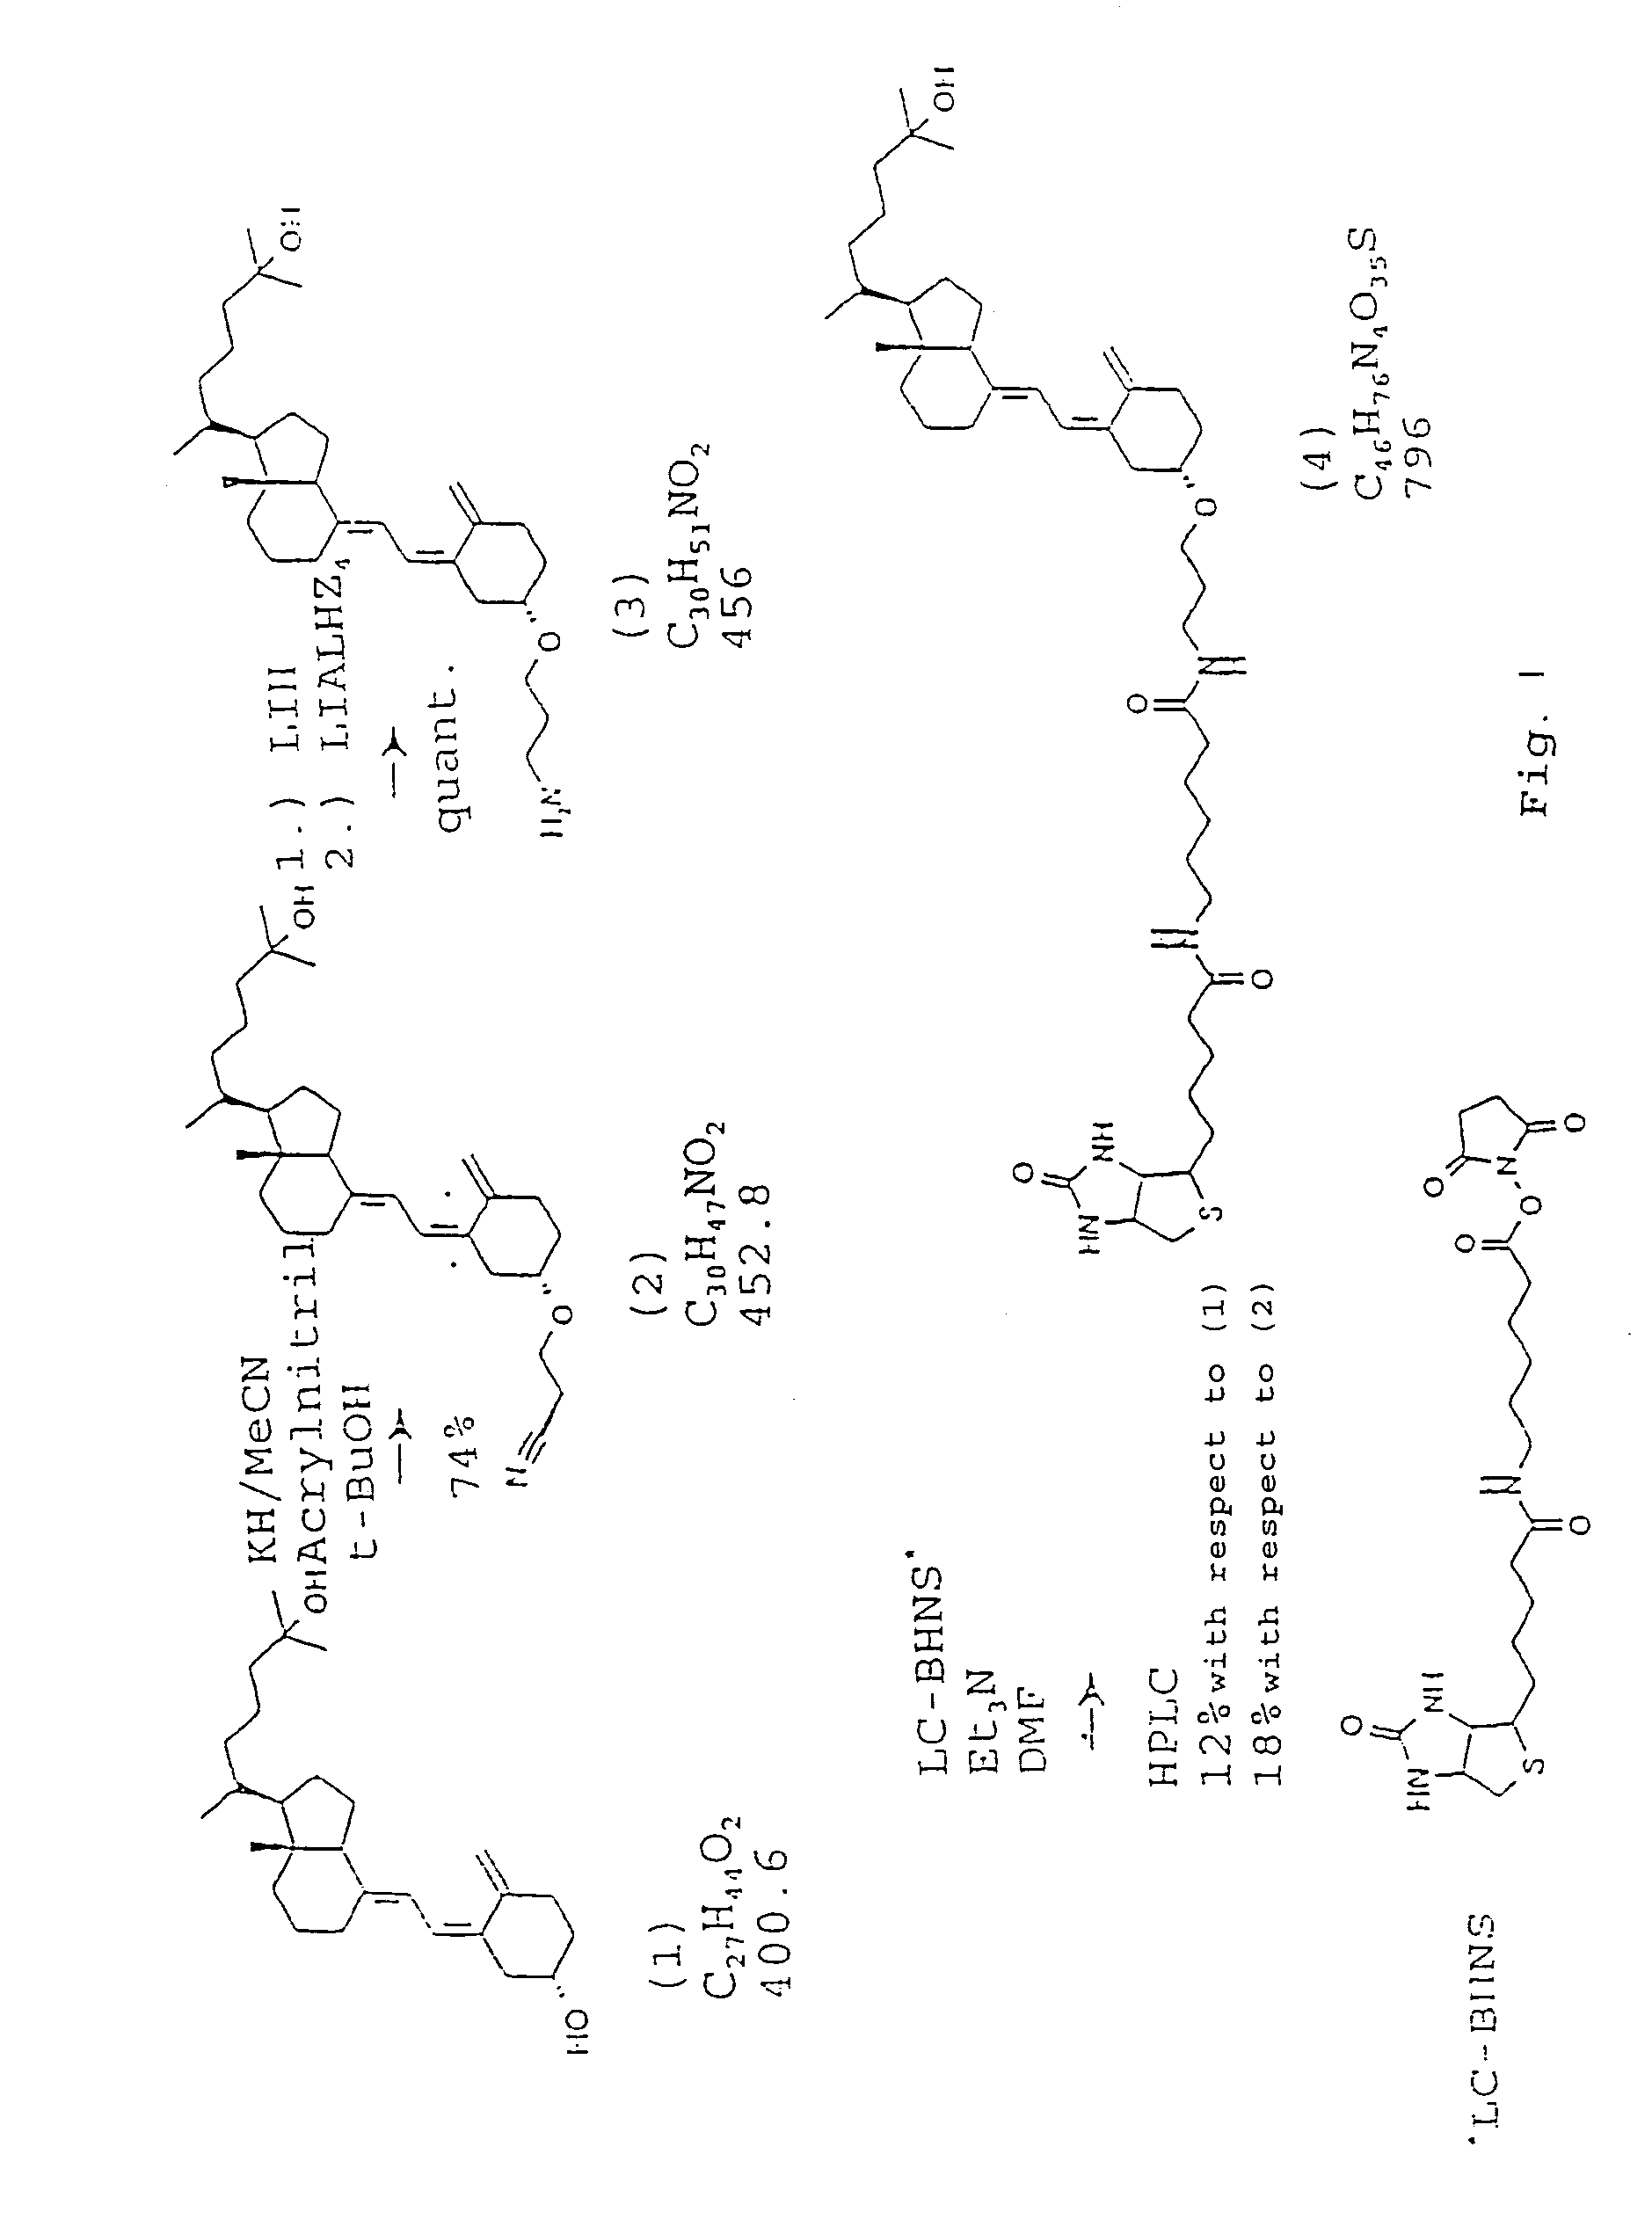 Functional vitamin D derivatives and method of determining 25-hydroxy- and 1α, 25-dihydroxy vitamin D